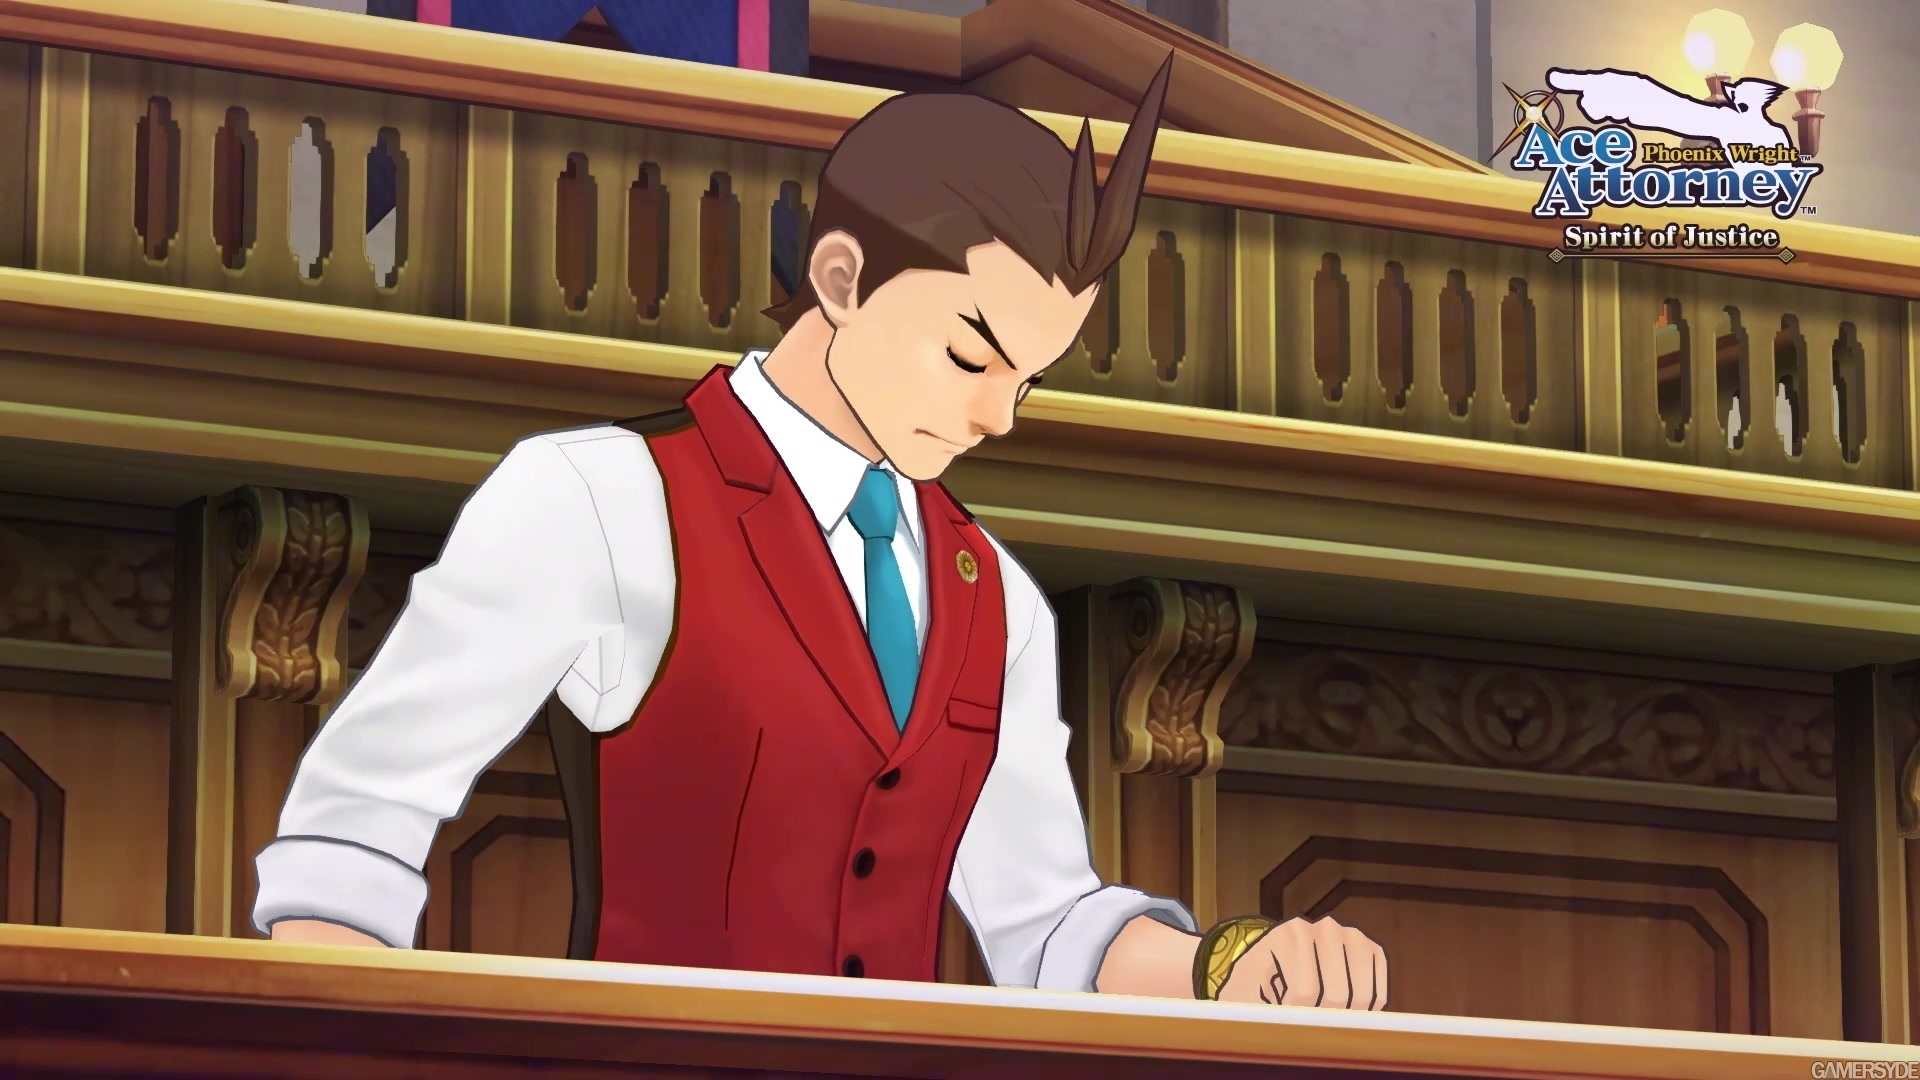 Apollo Justice: Ace Attorney Trilogy - Download